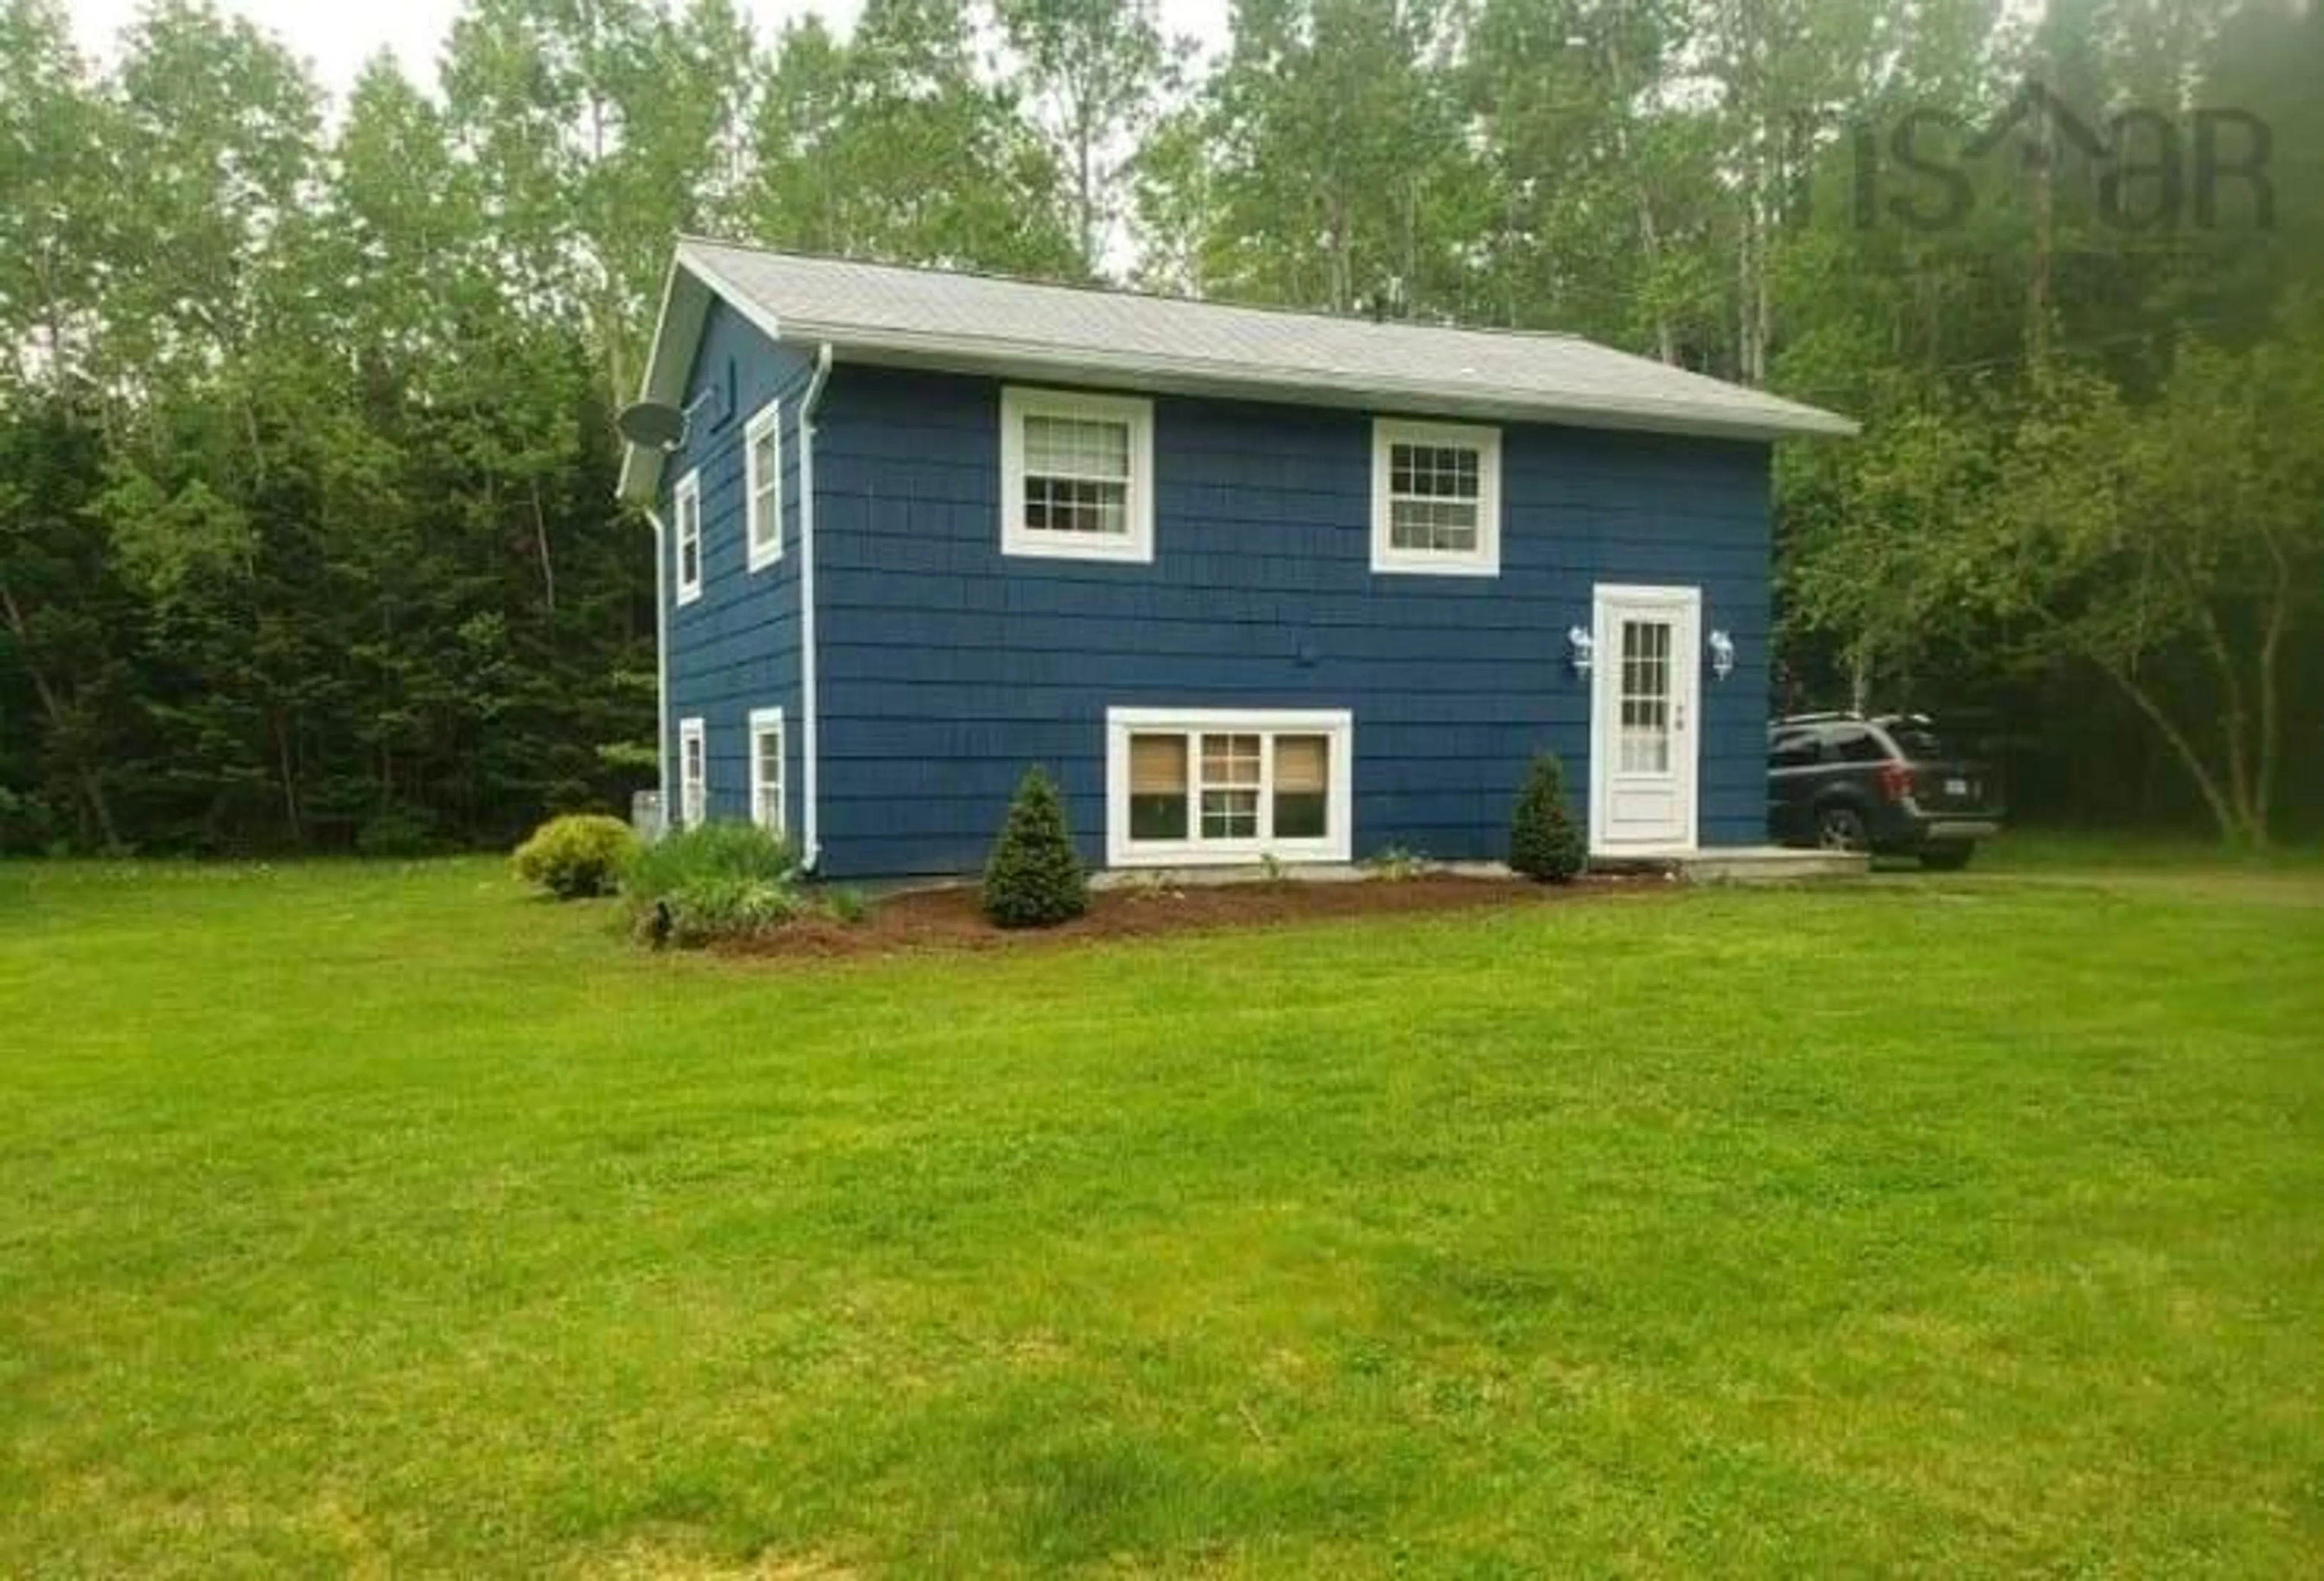 Home with unknown exterior material for 403 Cenotaph Rd, West Bay Nova Scotia B0E 3L0